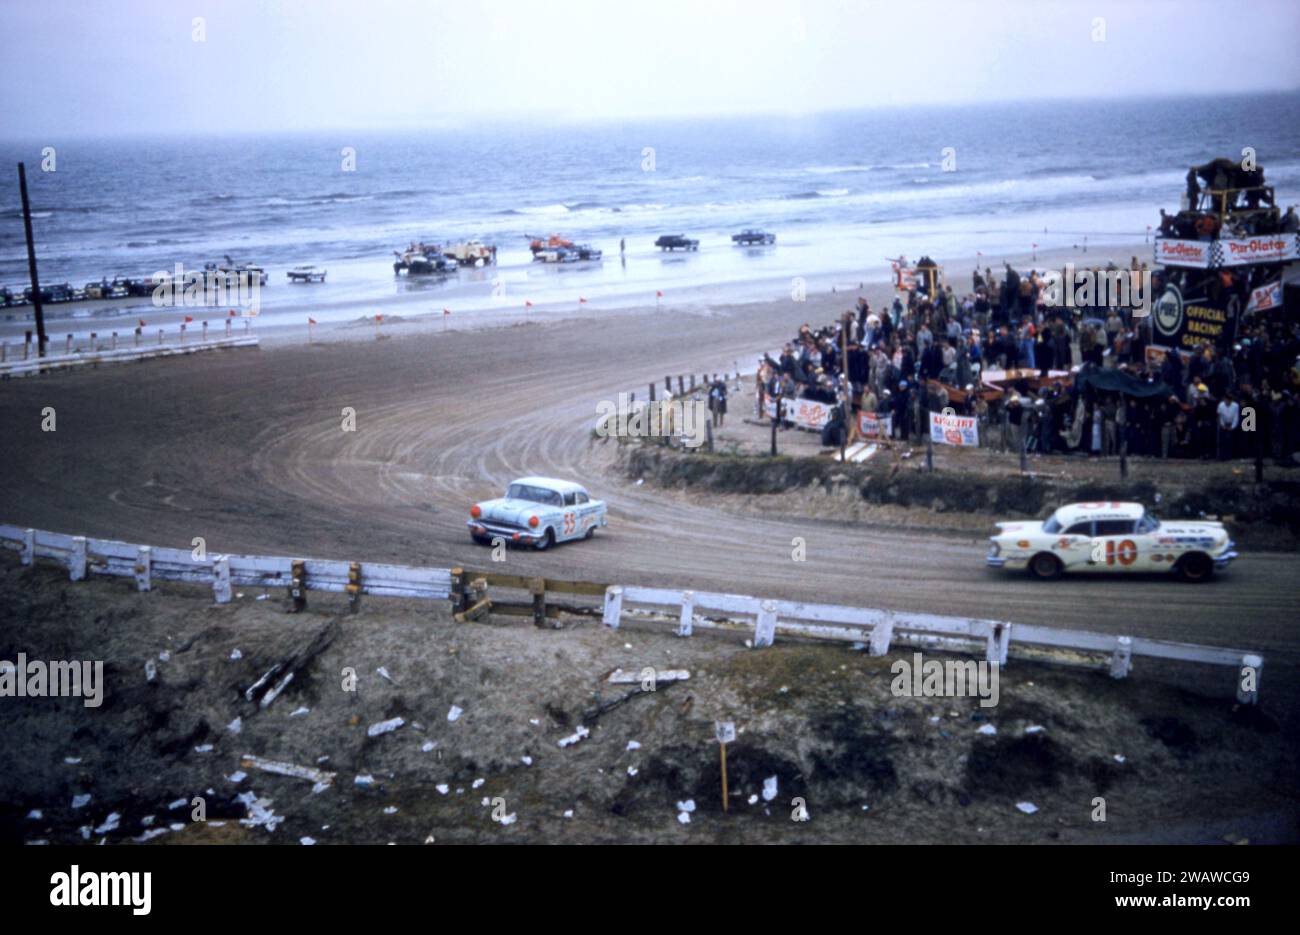 DAYTONA BEACH, FL - FEBRUARY 26: Junior Johnson in the #55 Pontiac spins out as Jim Cushman in the #10 Buick drives past him during the 1956 NASCAR Daytona Beach and Road Course race on February 26, 1956 in Daytona Beach, Florida. (Photo by Hy Peskin) *** Local Caption *** Junior Johnson;Jim Cushman Stock Photo